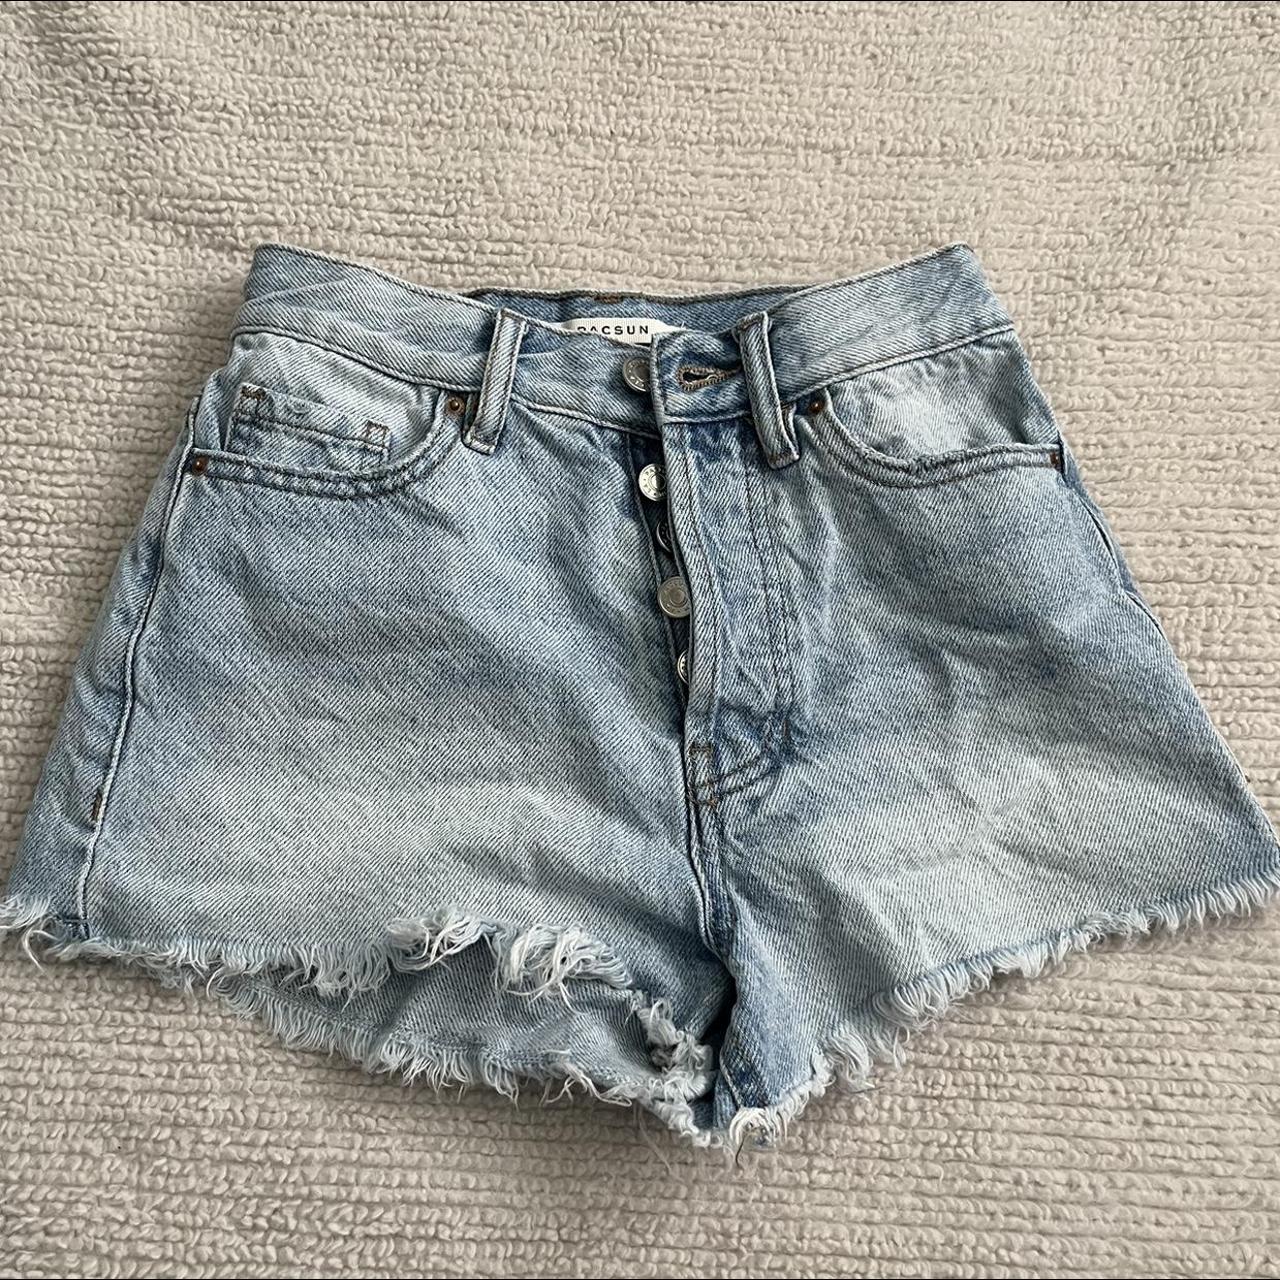 summer jean shorts 22” says vintage high rise on the... - Depop